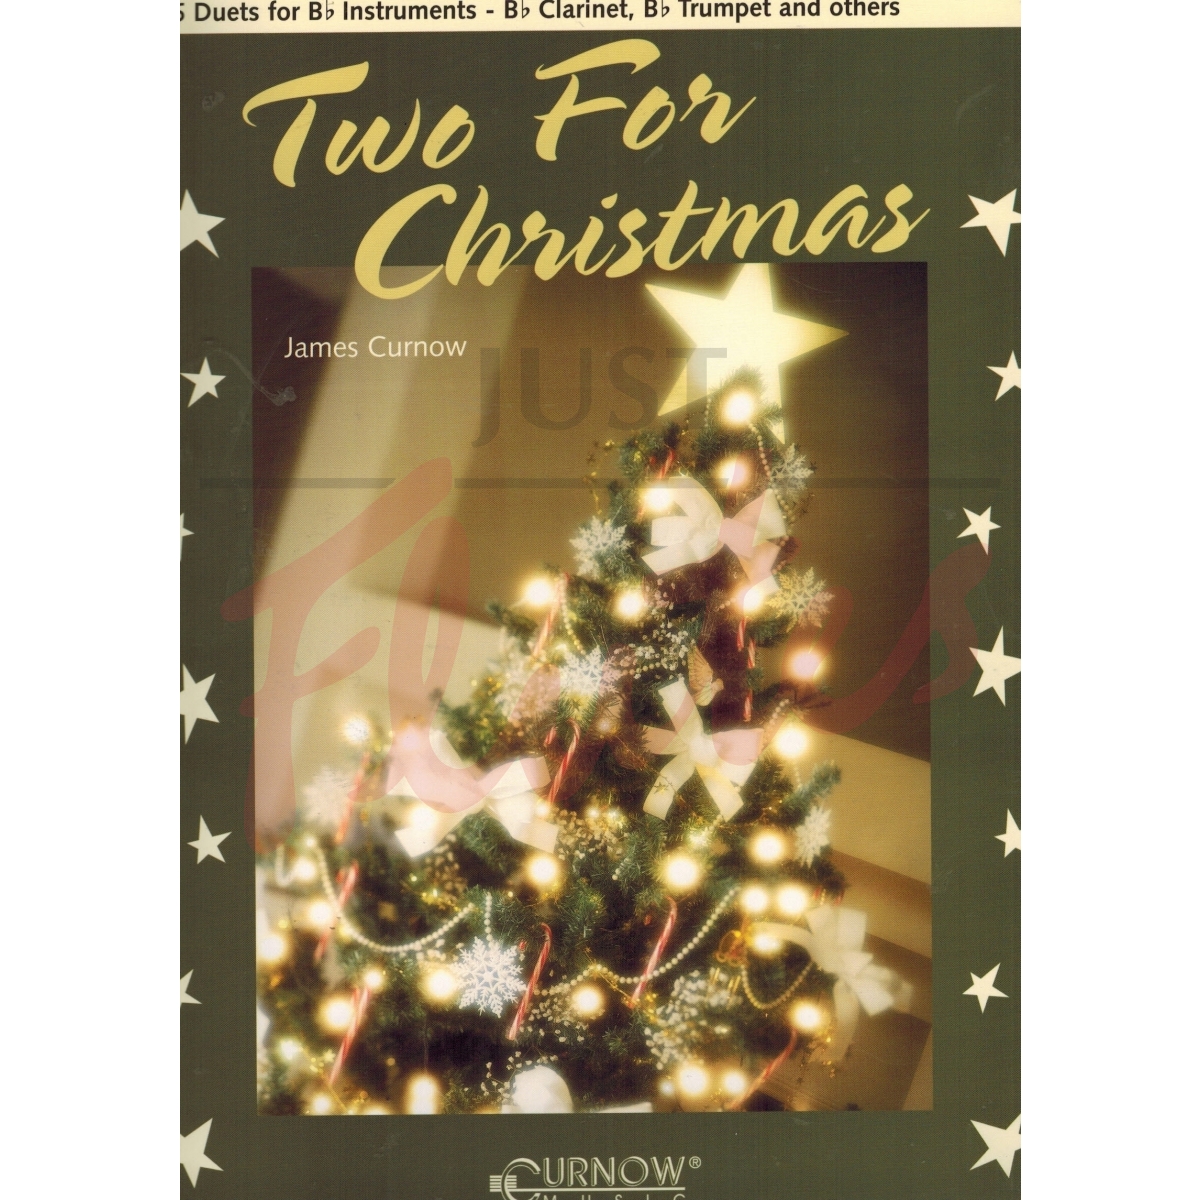 Two for Christmas [Two Bb Instruments]